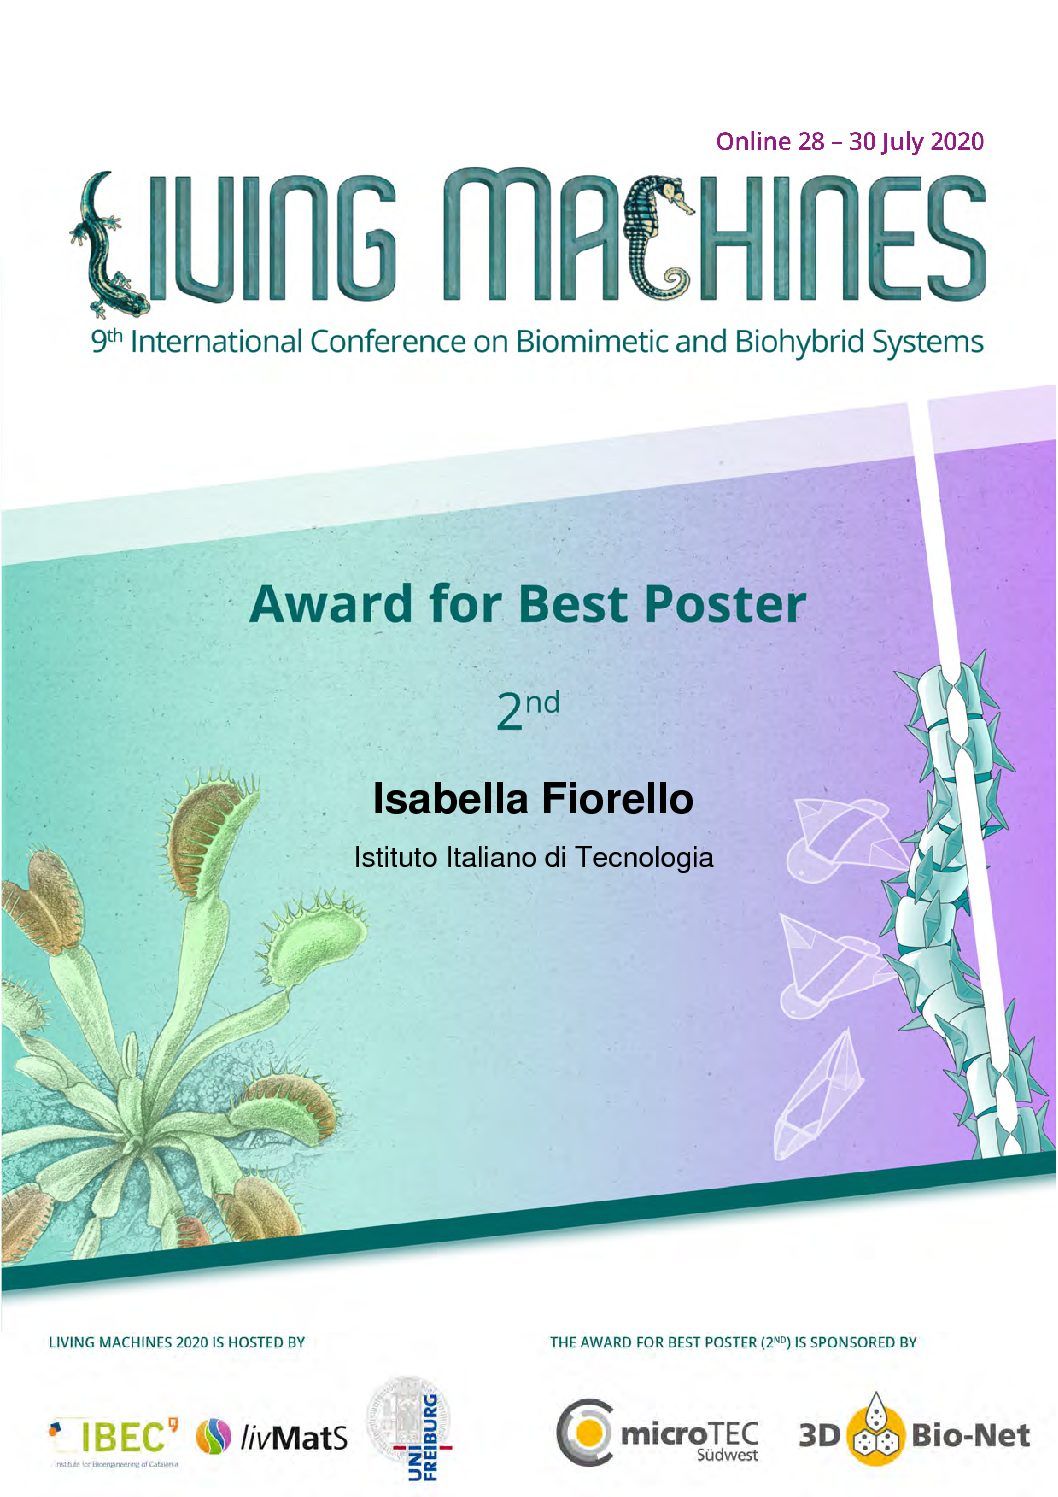 Second place for best poster award at Living Machines 2020